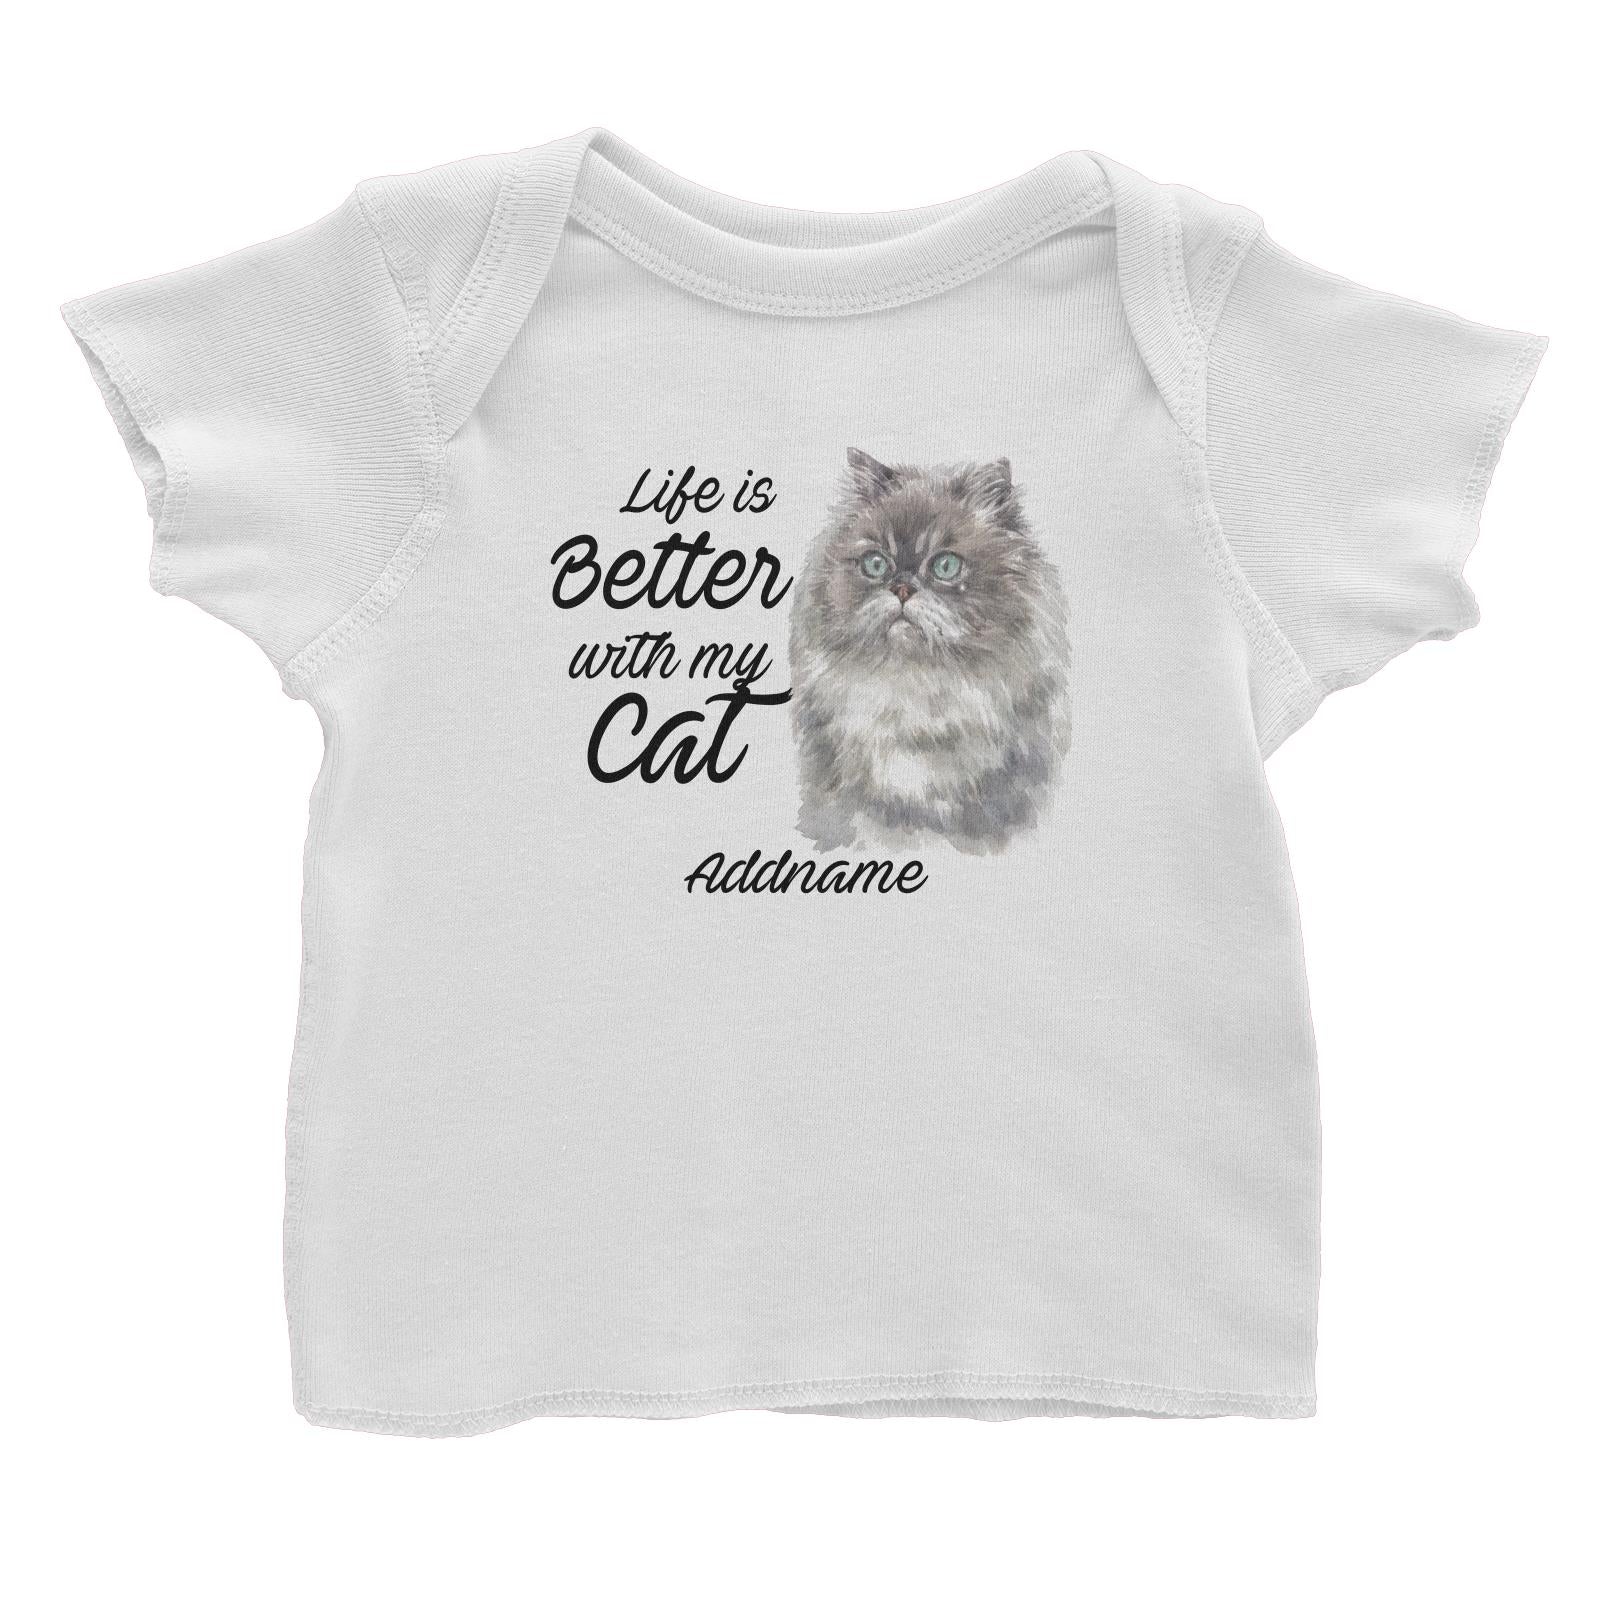 Watercolor Life is Better With My Cat Himalayan Addname Baby T-Shirt